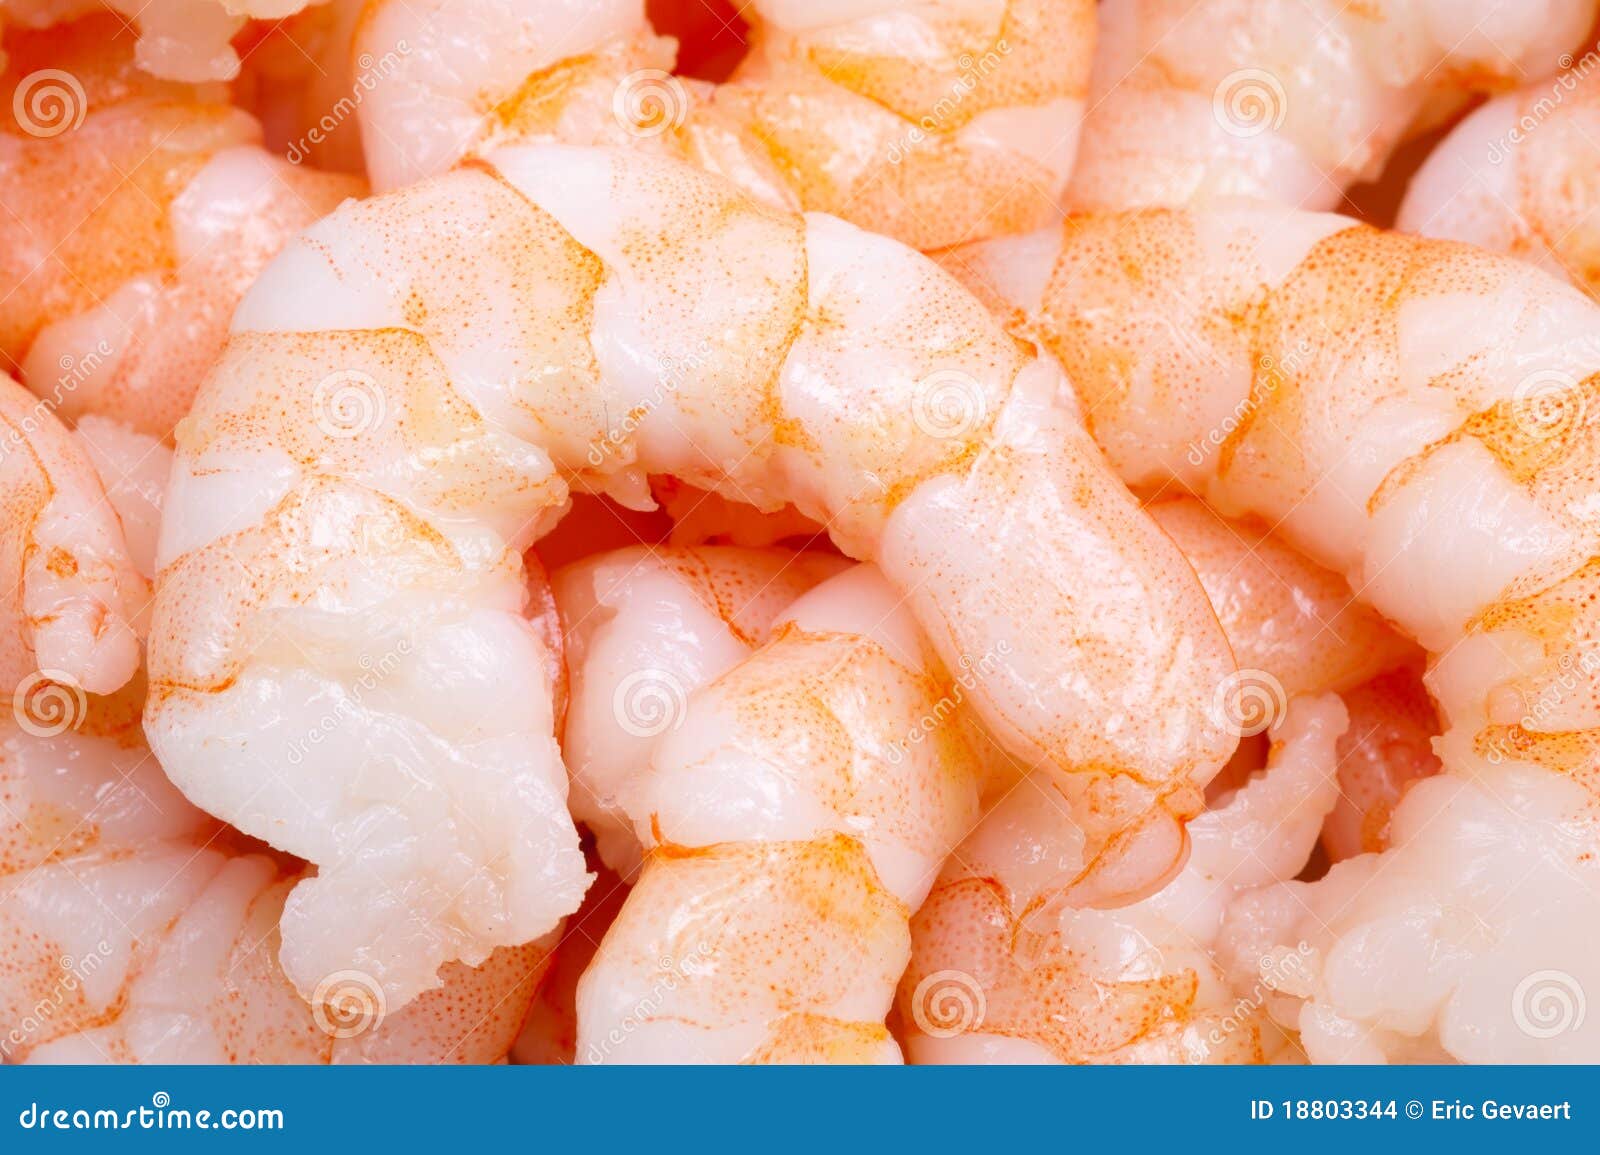 group of cooked prepared shrimp